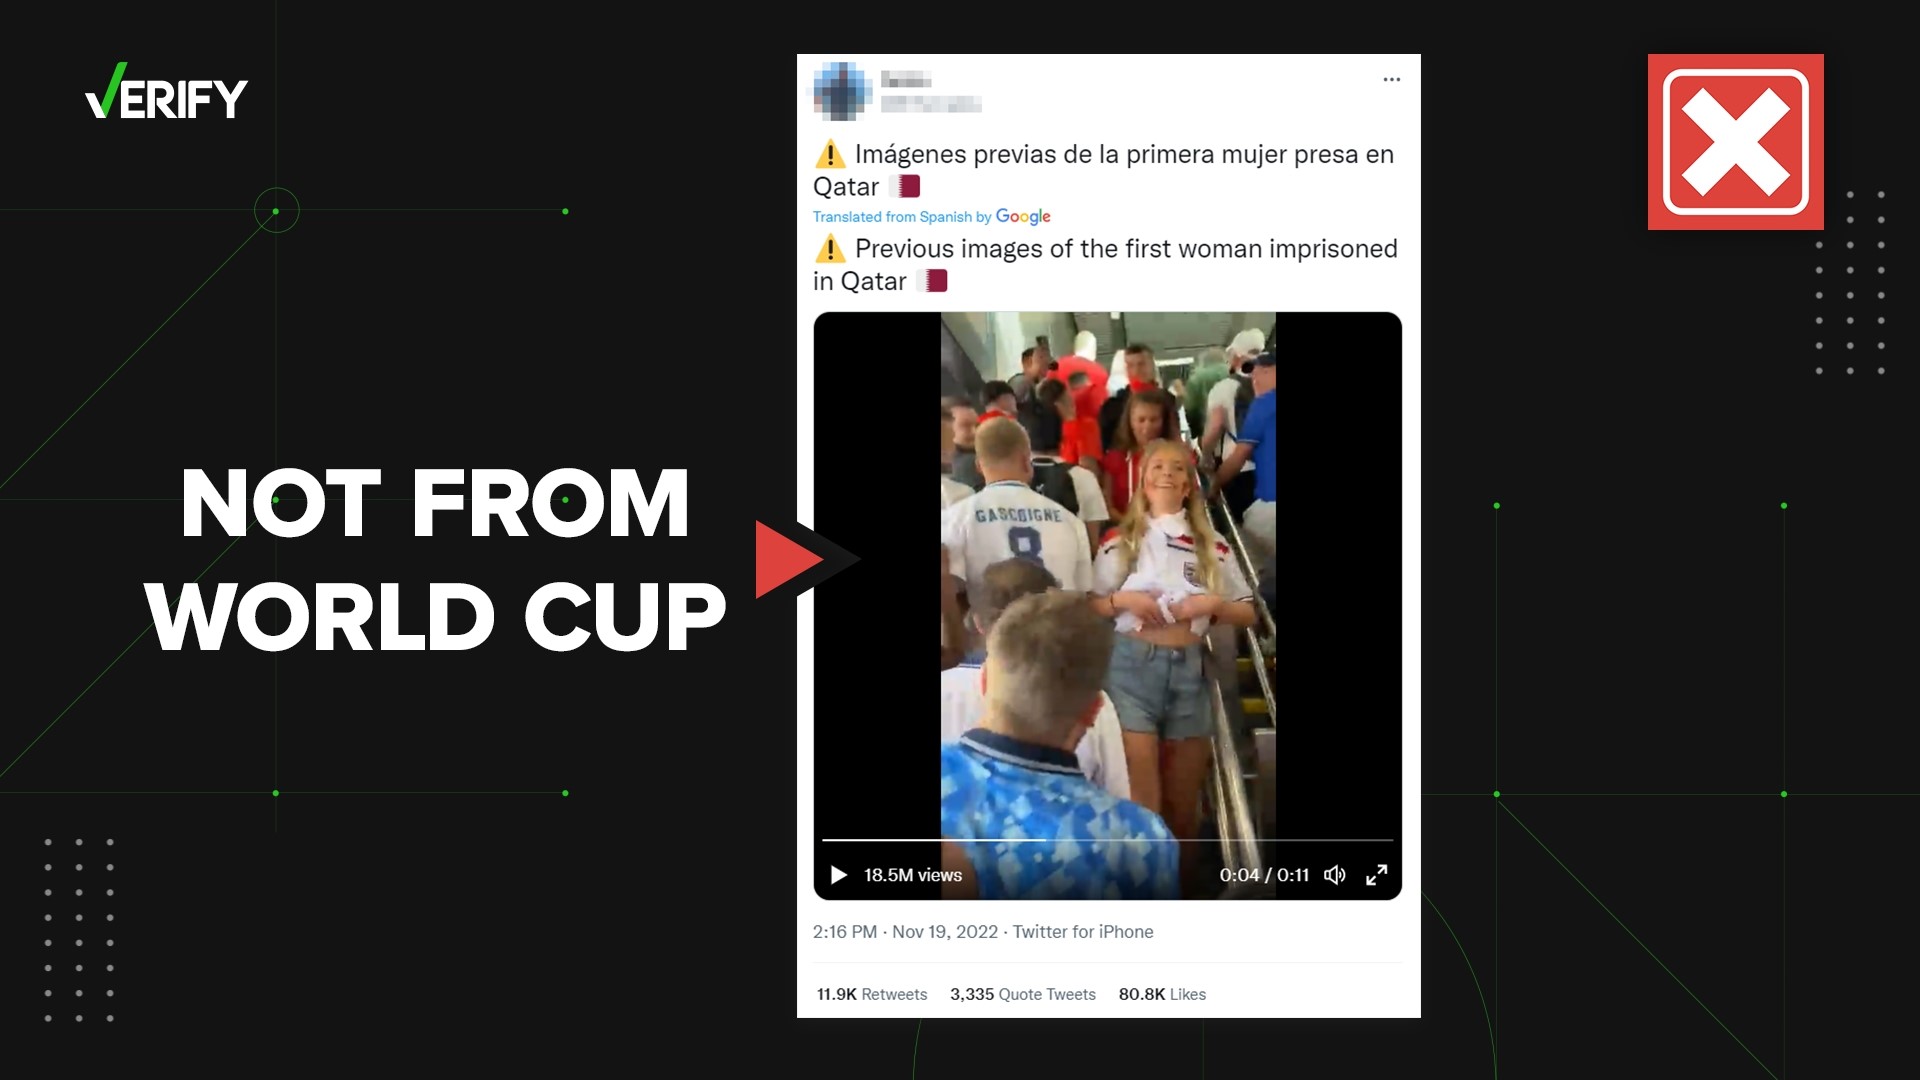 VERIFY is fact-checking images or videos claiming to be from the 2022 FIFA World Cup. These viral videos were not taken during the current tournament.